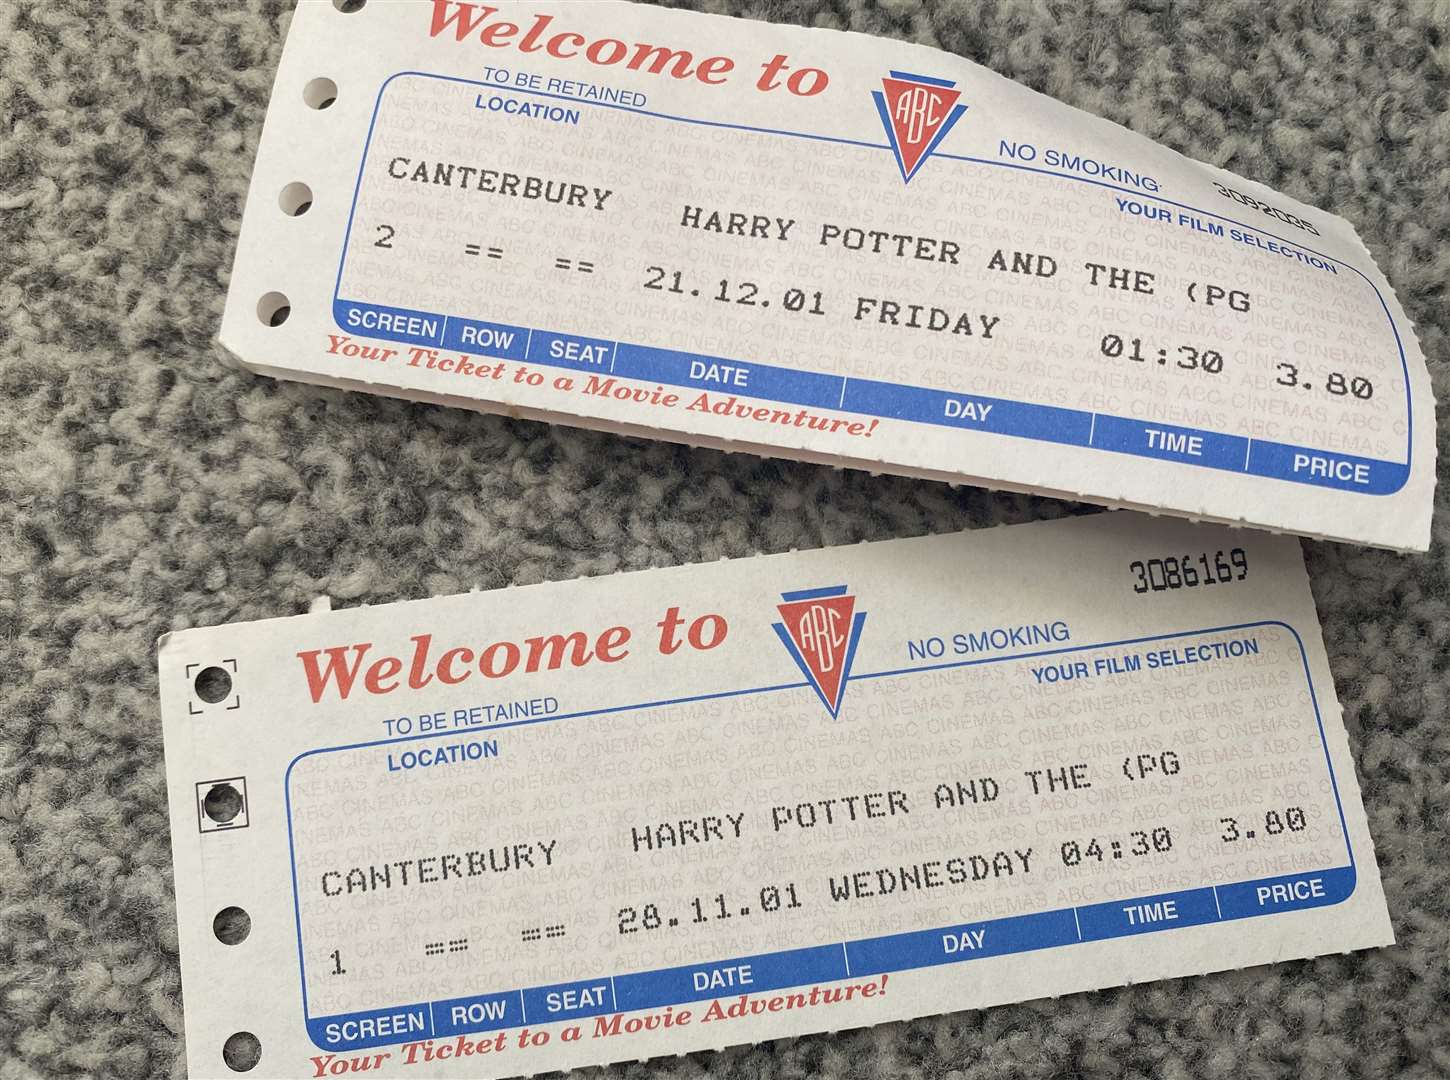 Cinema tickets for Harry Potter and the Philosopher's Stone in 2001. It cost £3.80 to see the film at ABC in Canterbury